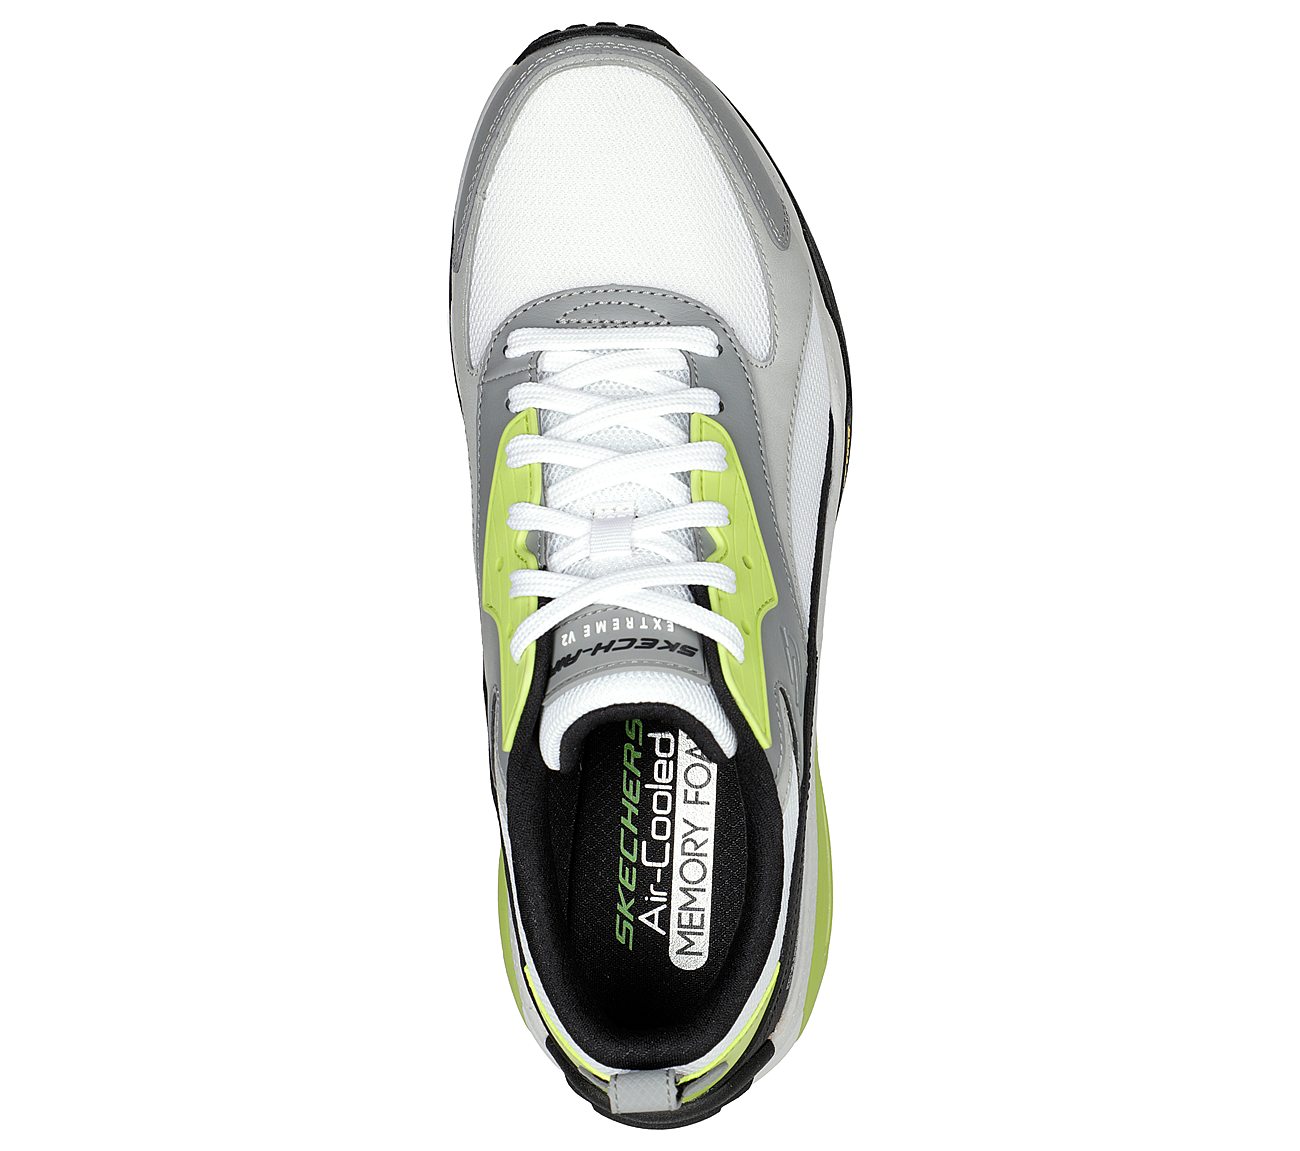 SKECH-AIR EXTREME V2, WHITE/BLACK/LIME Footwear Top View